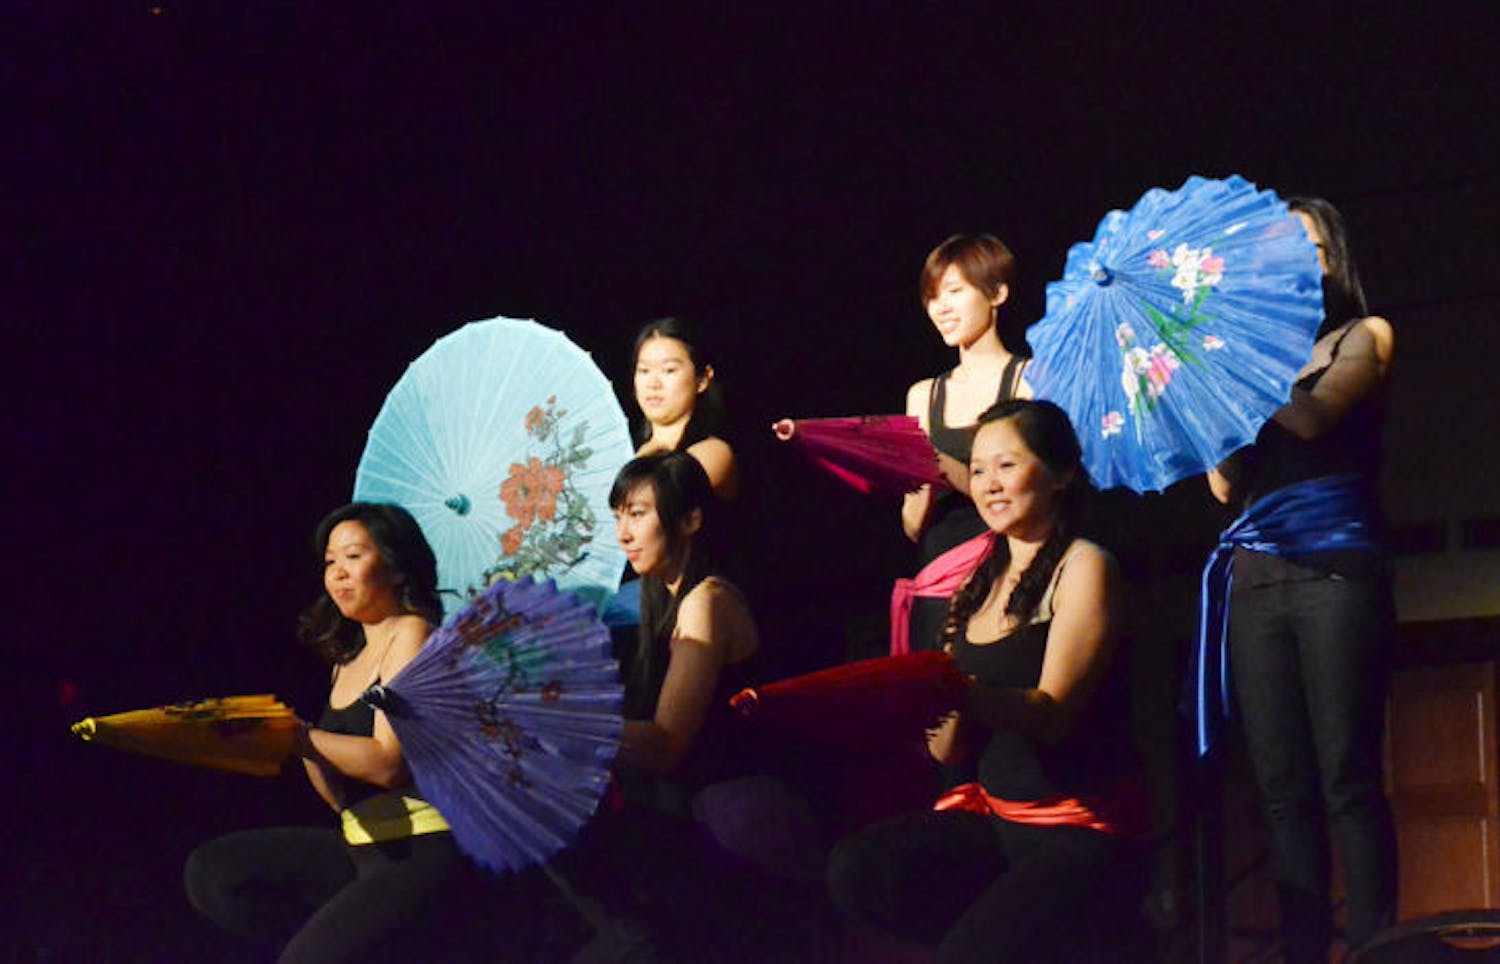 Members of the Chinese Asian Student Association perform the Umbrella dance, a traditional Chinese dance, at the Chinese New Year Festival 2013: Enter the Unknown in the Reitz Union Grand Ballroom on Saturday.